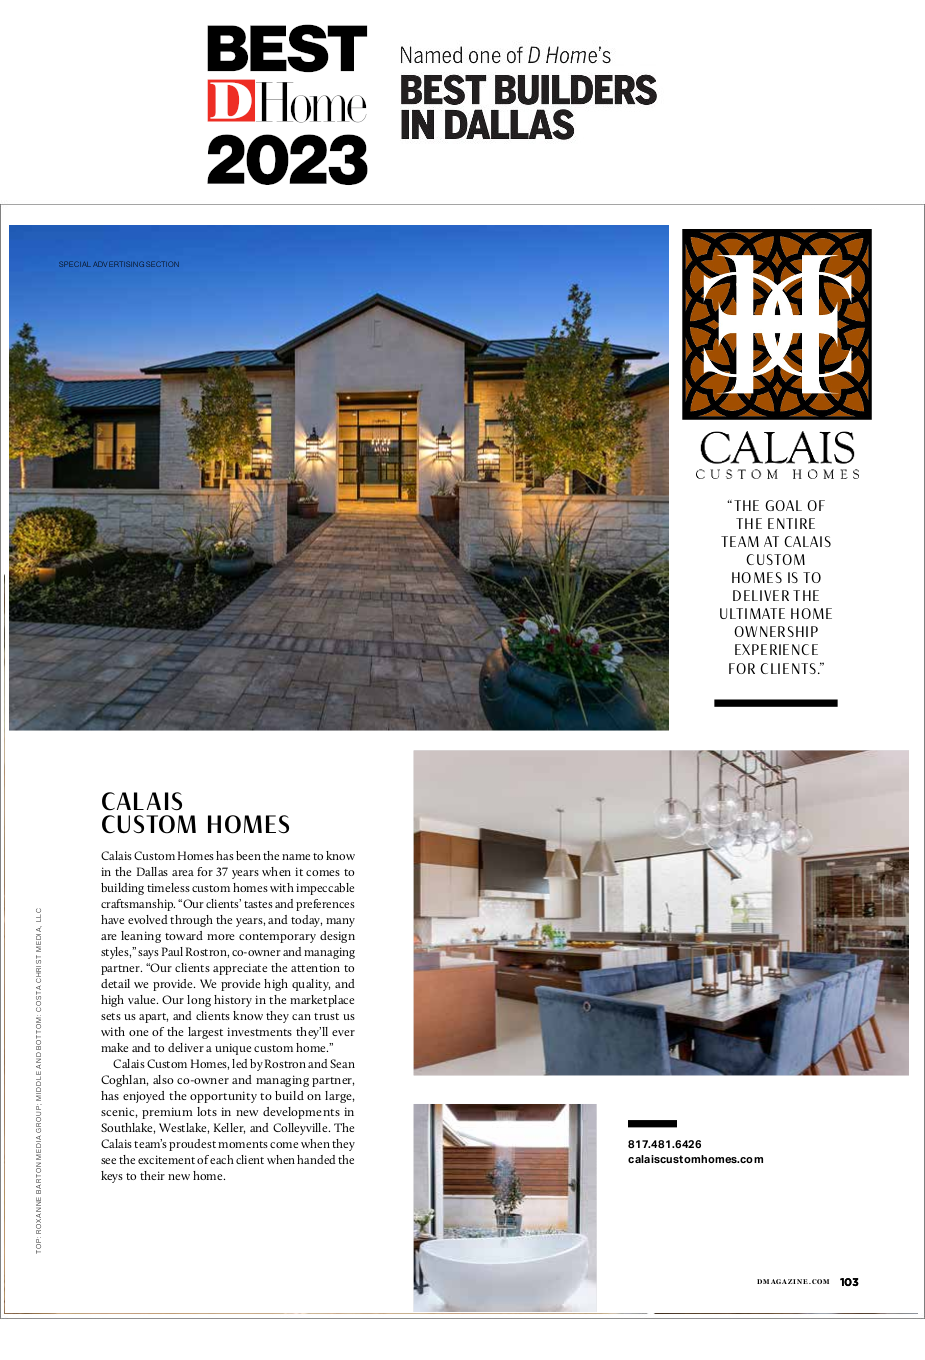 2023 DHome Best Builder Award Article